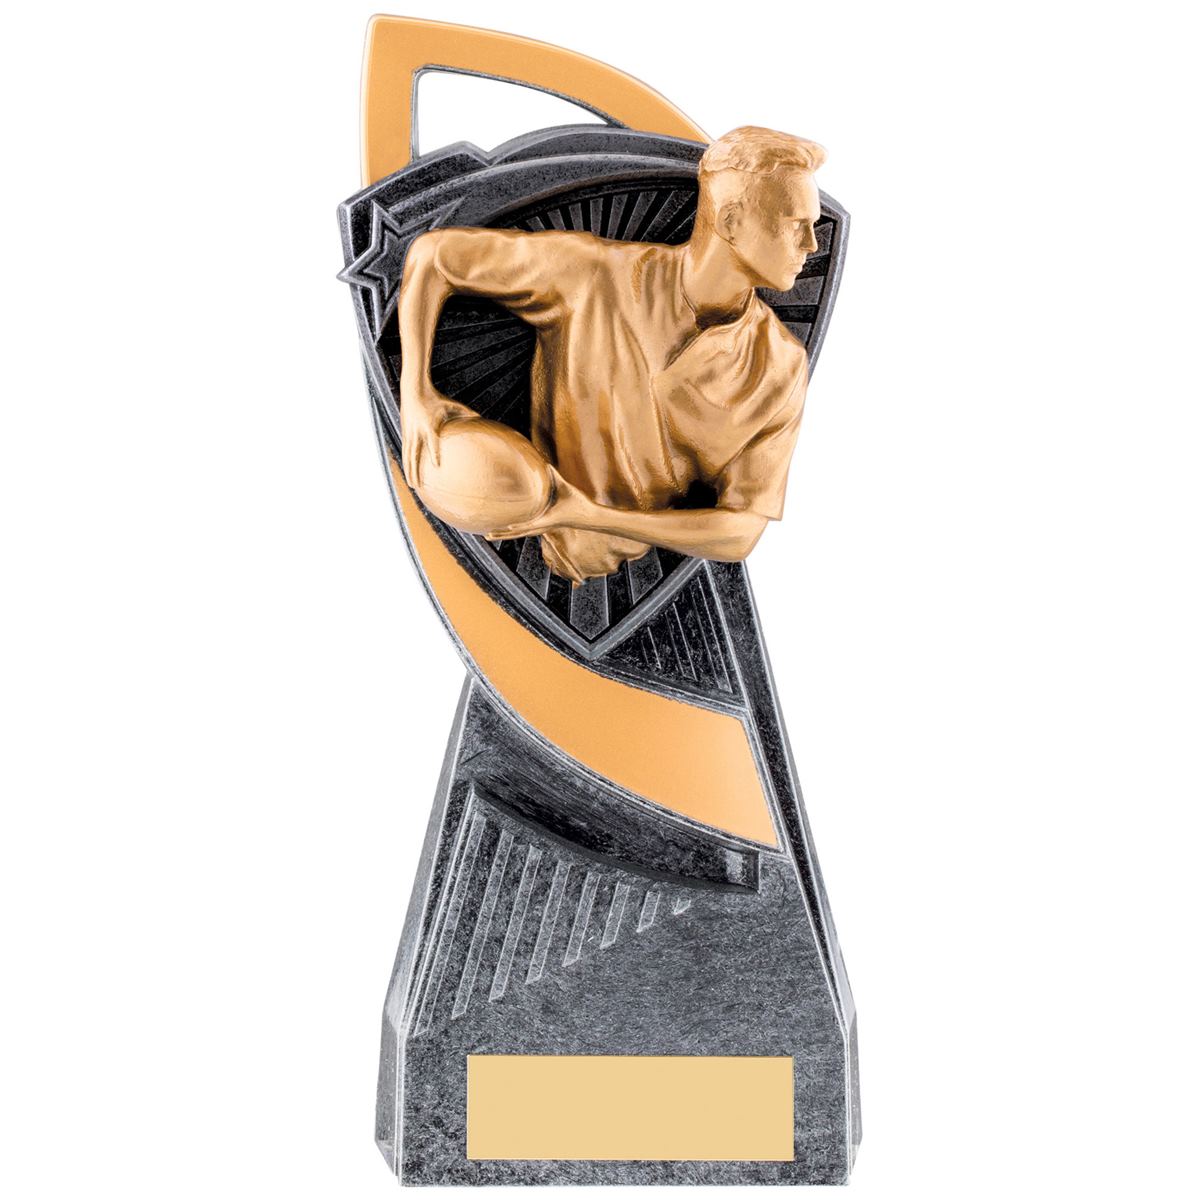 Mens Rugby Player Utopia Trophy